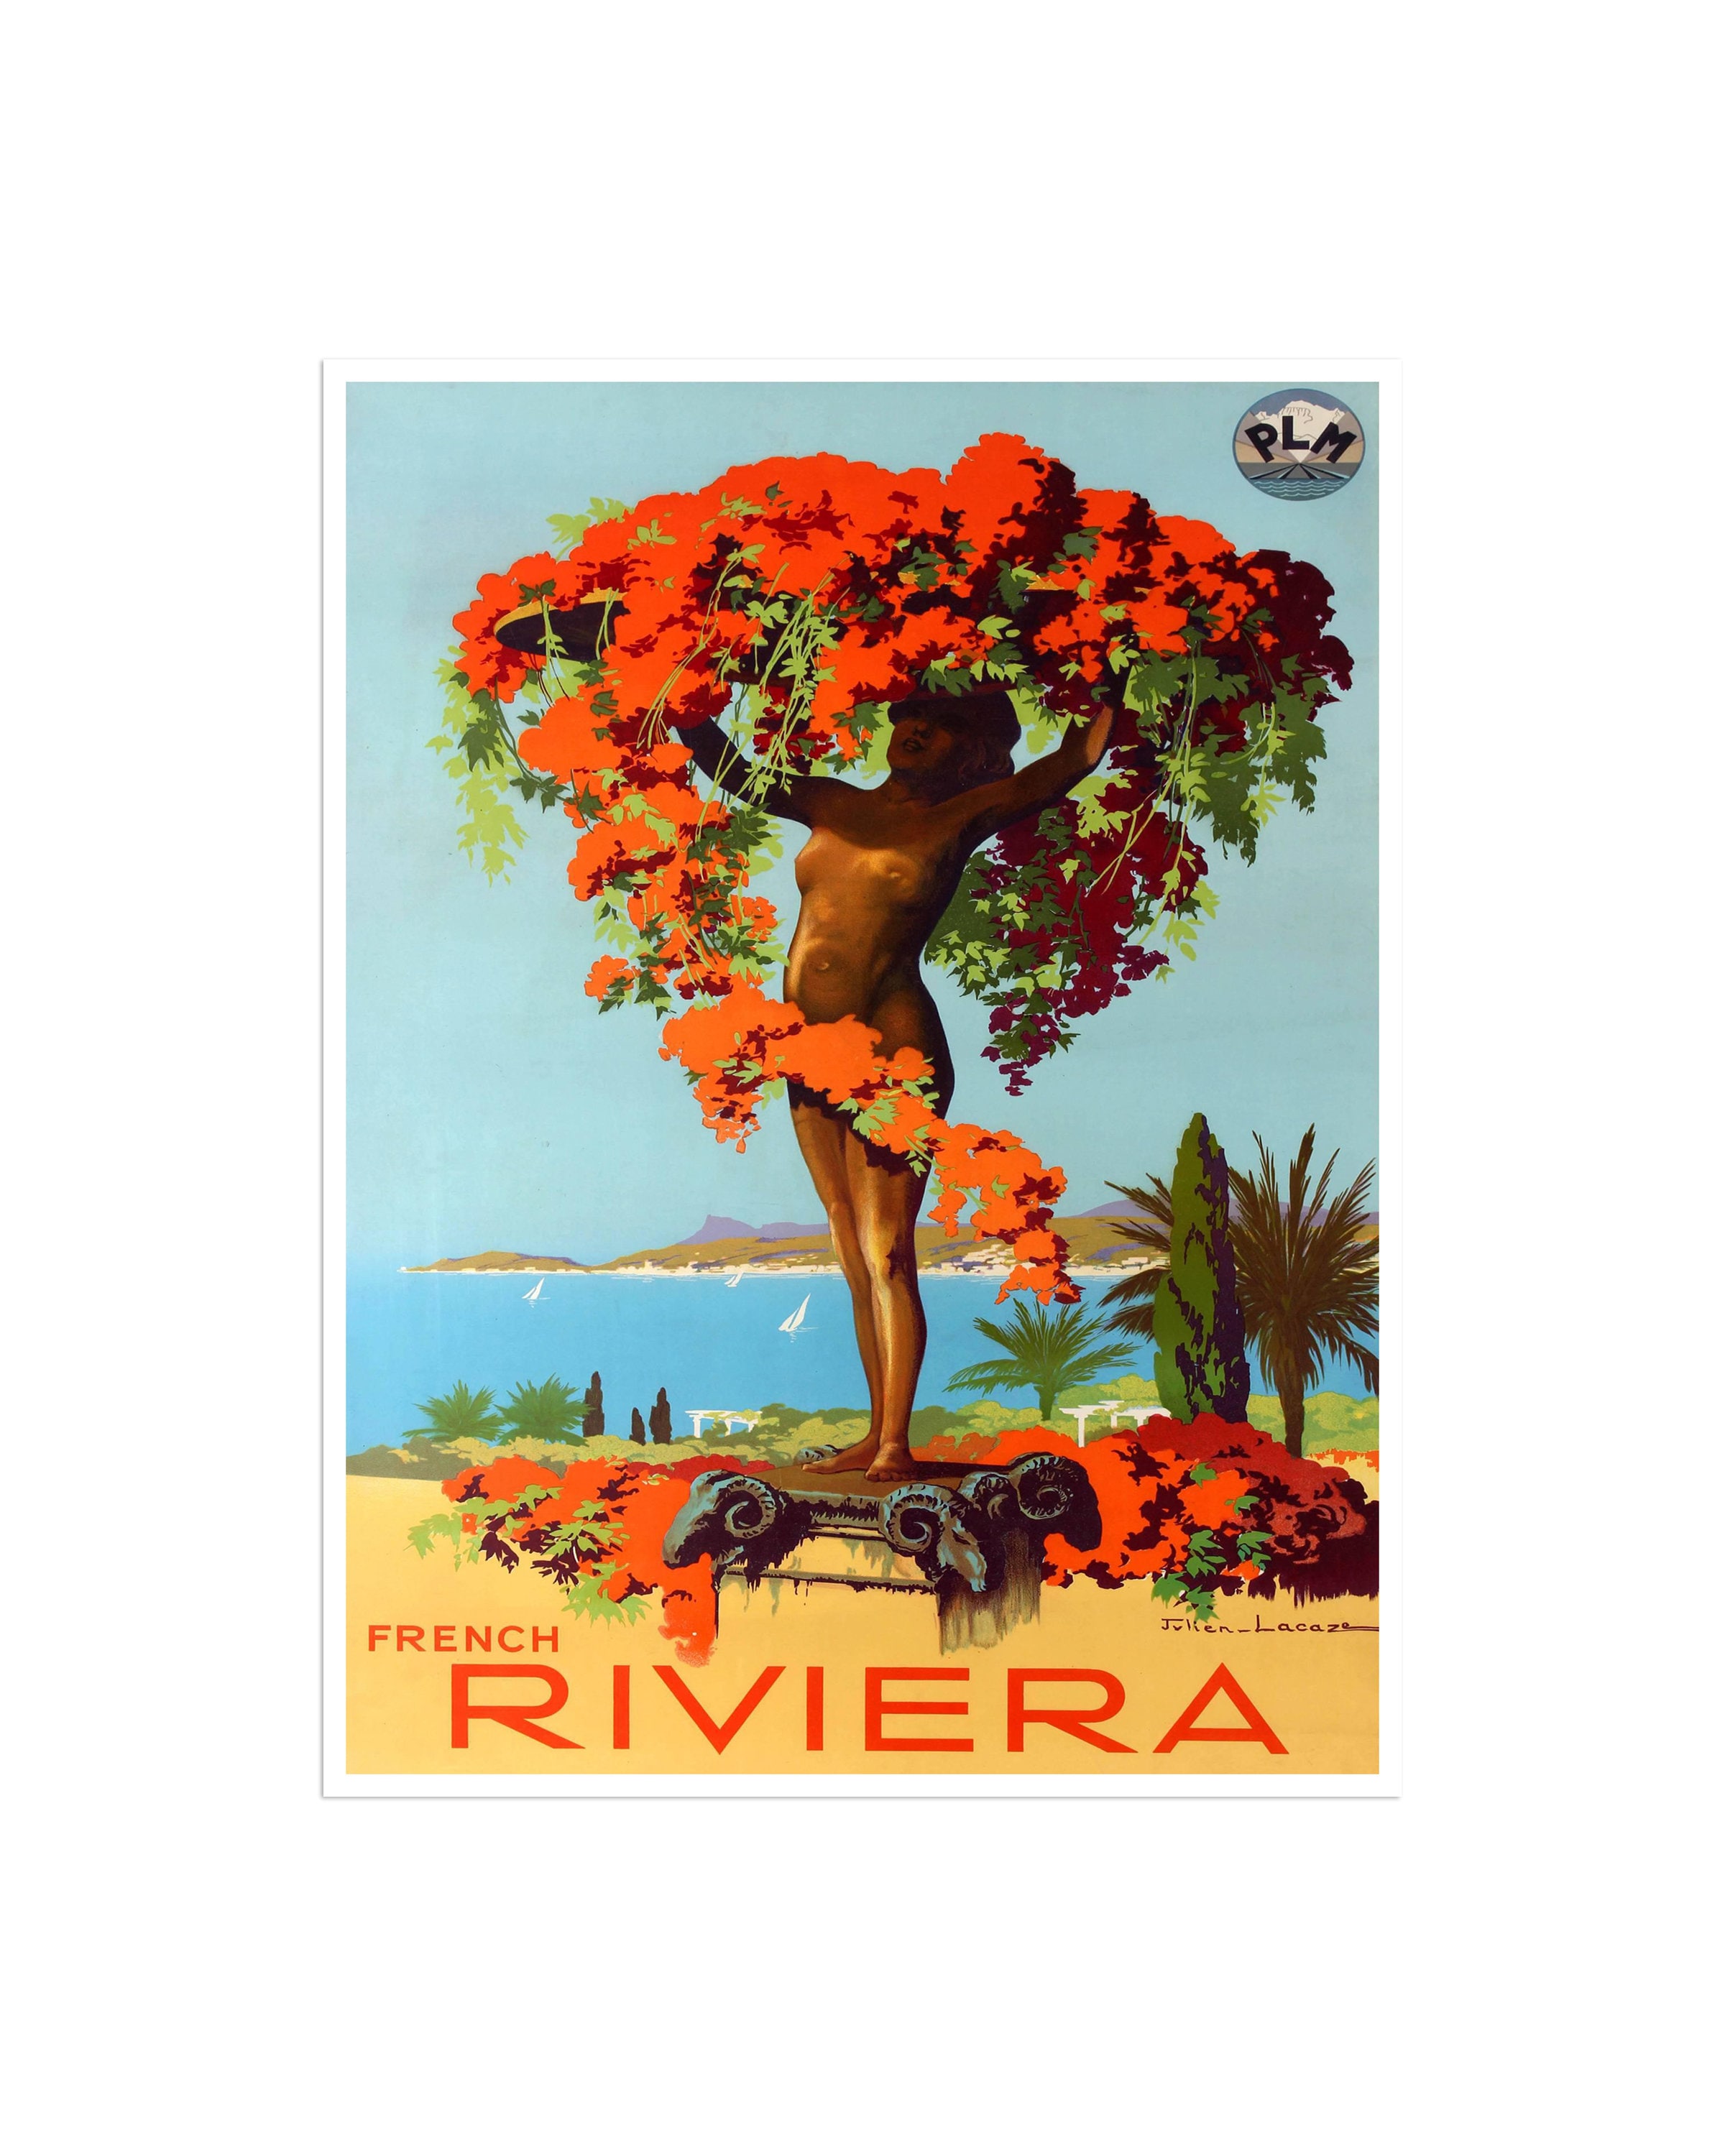 French Riviera Art France Travel Poster Print Vintage Home